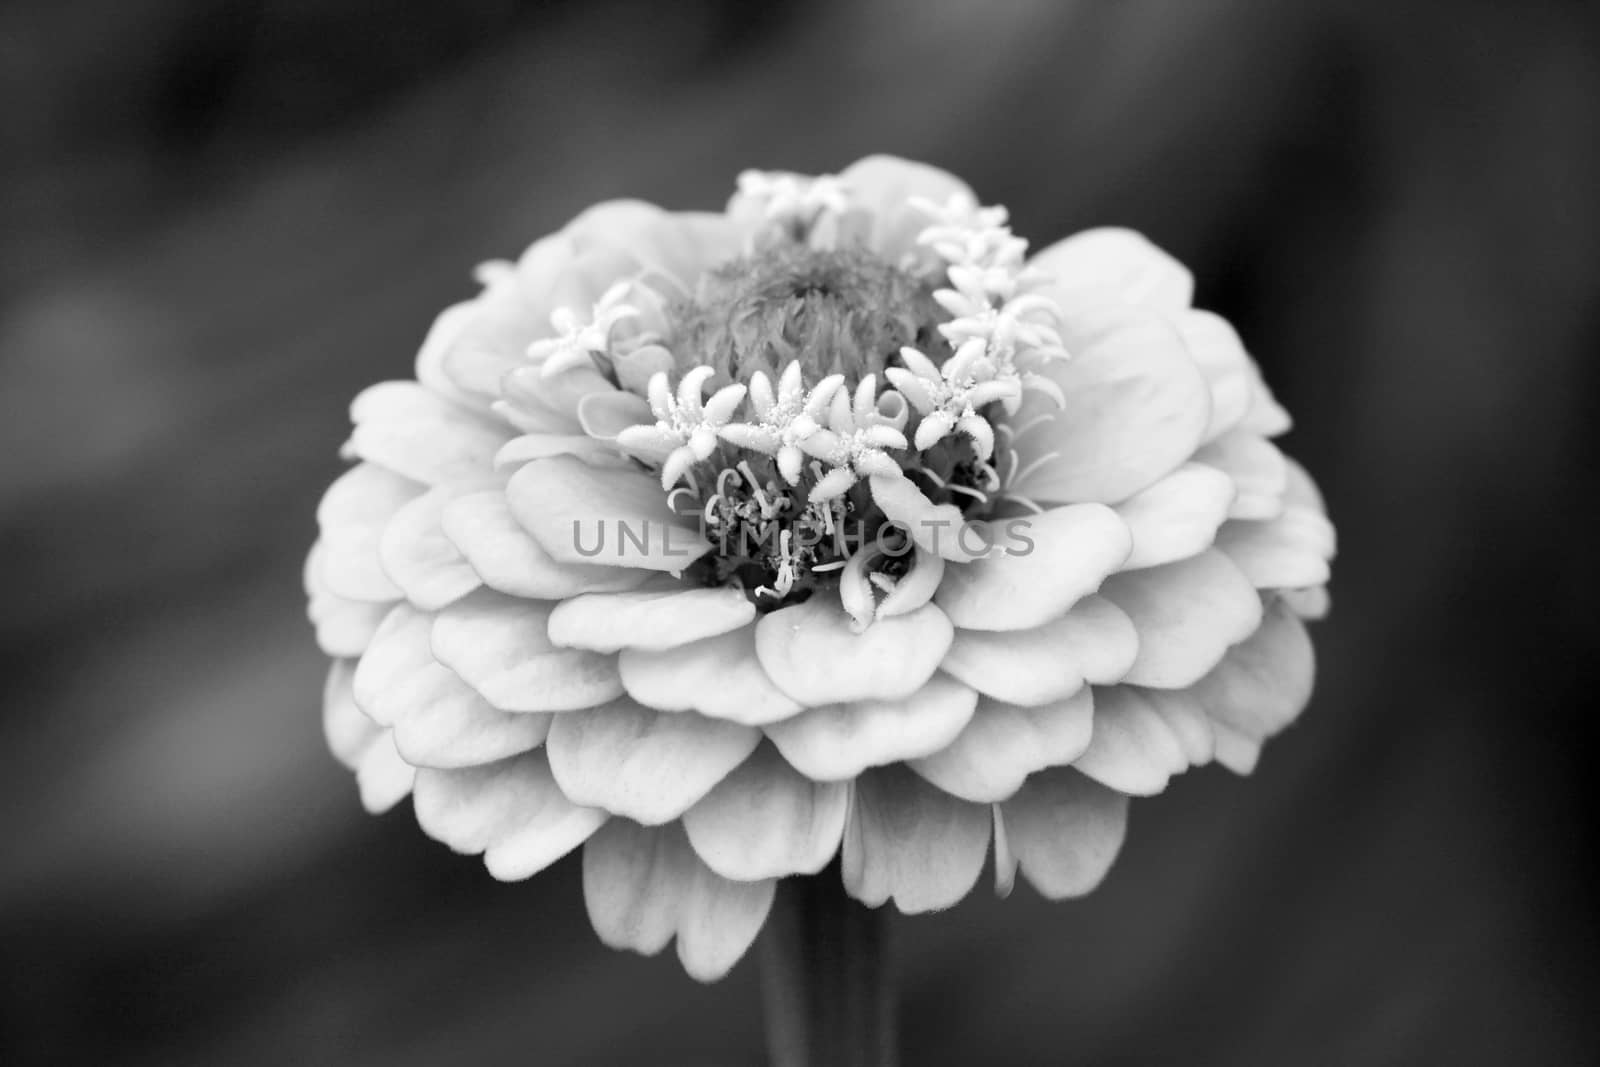 Macro of a zinnia flower with layers of small petals - monochrome processing